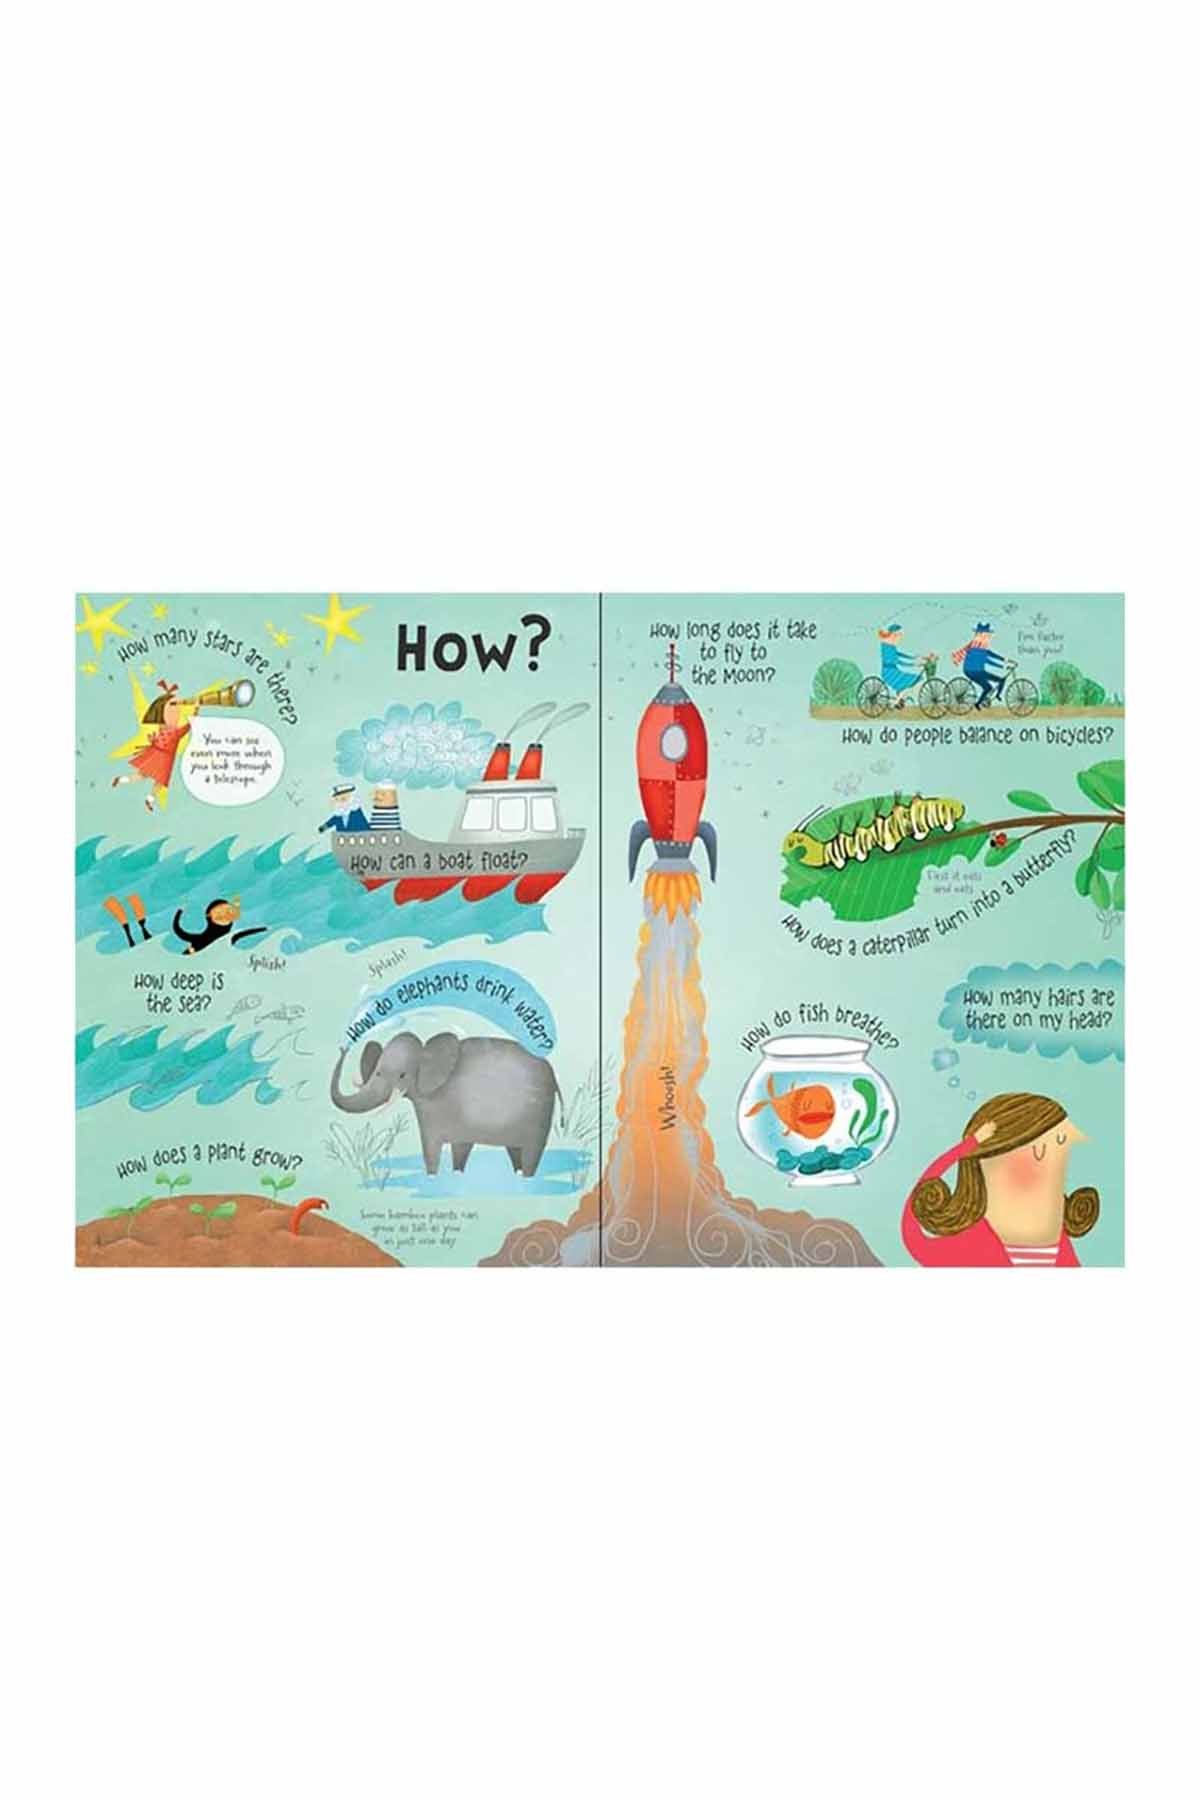 The Usborne Lift The Flap Questions & Answers